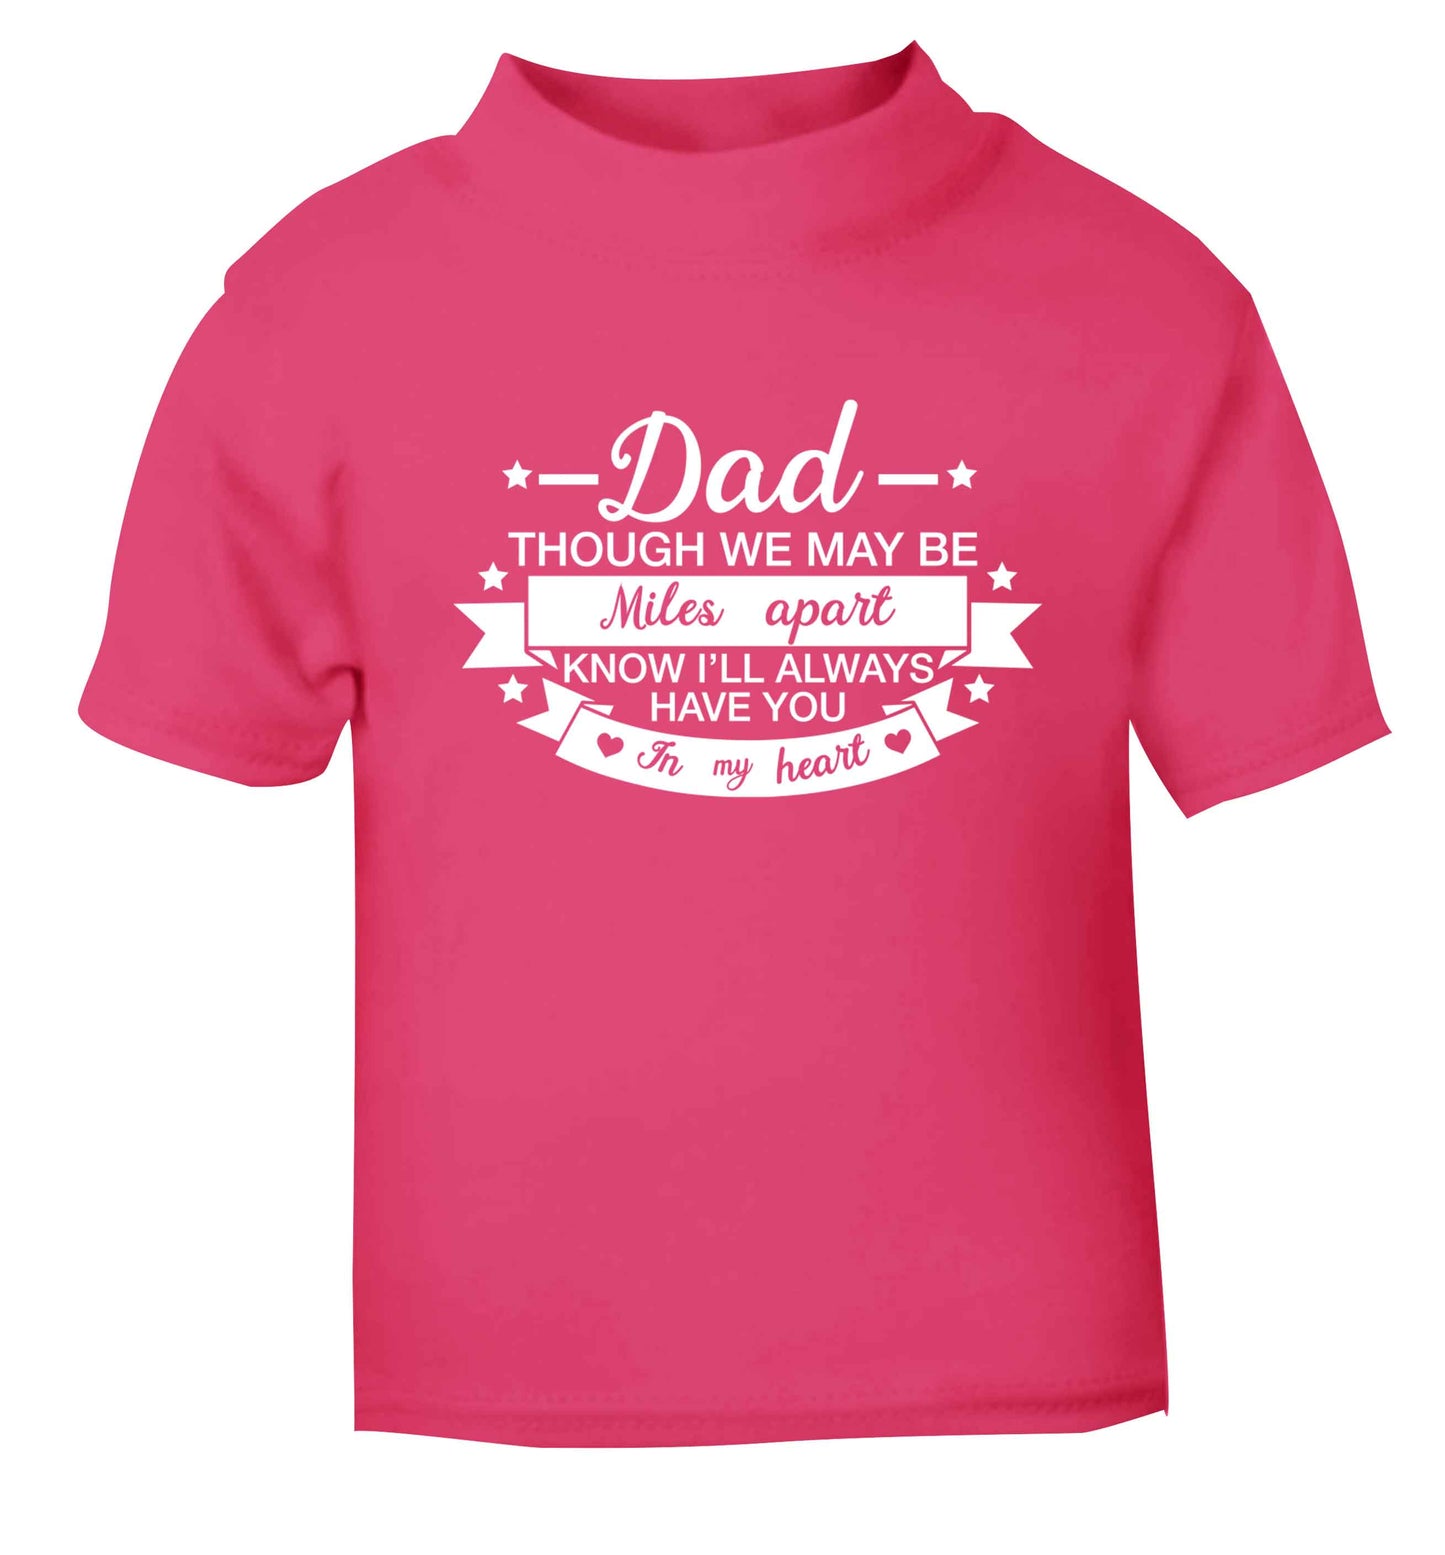 Dad though we are miles apart know I'll always have you in my heart pink baby toddler Tshirt 2 Years